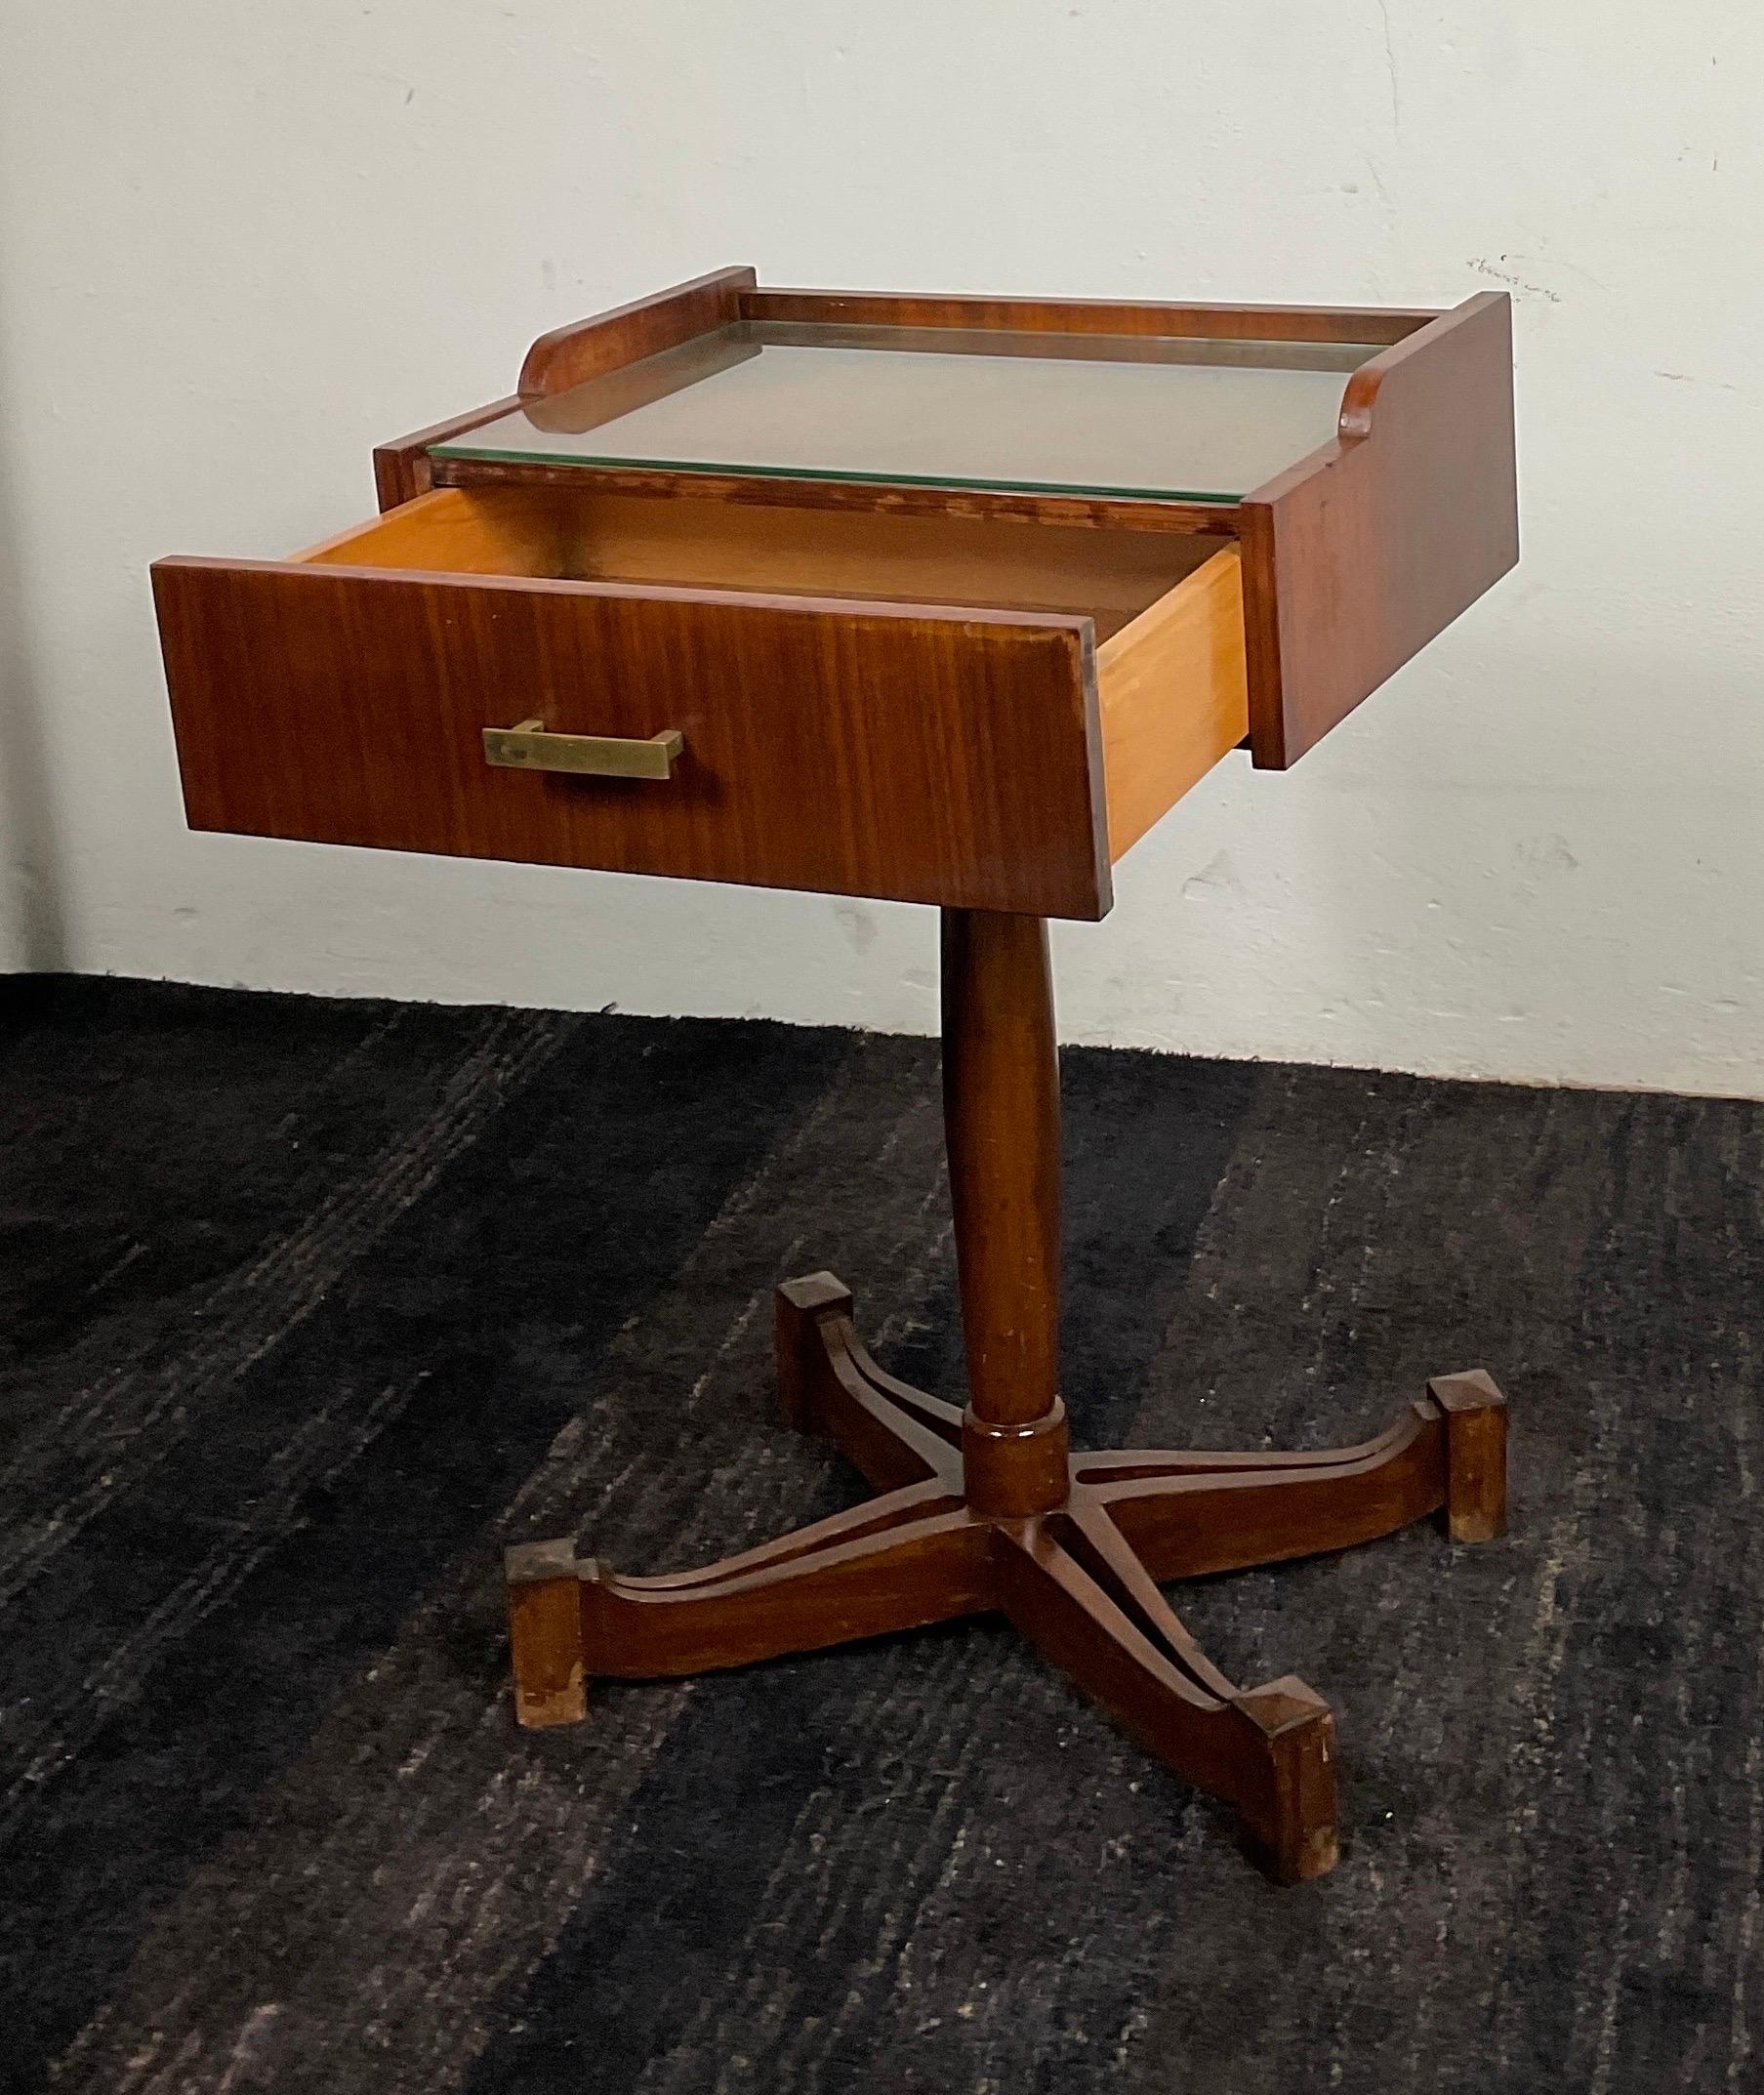 Wooden Nightstand Sc 50 Model by Carlo Salocchi for Sormani 60's, Italy For Sale 1